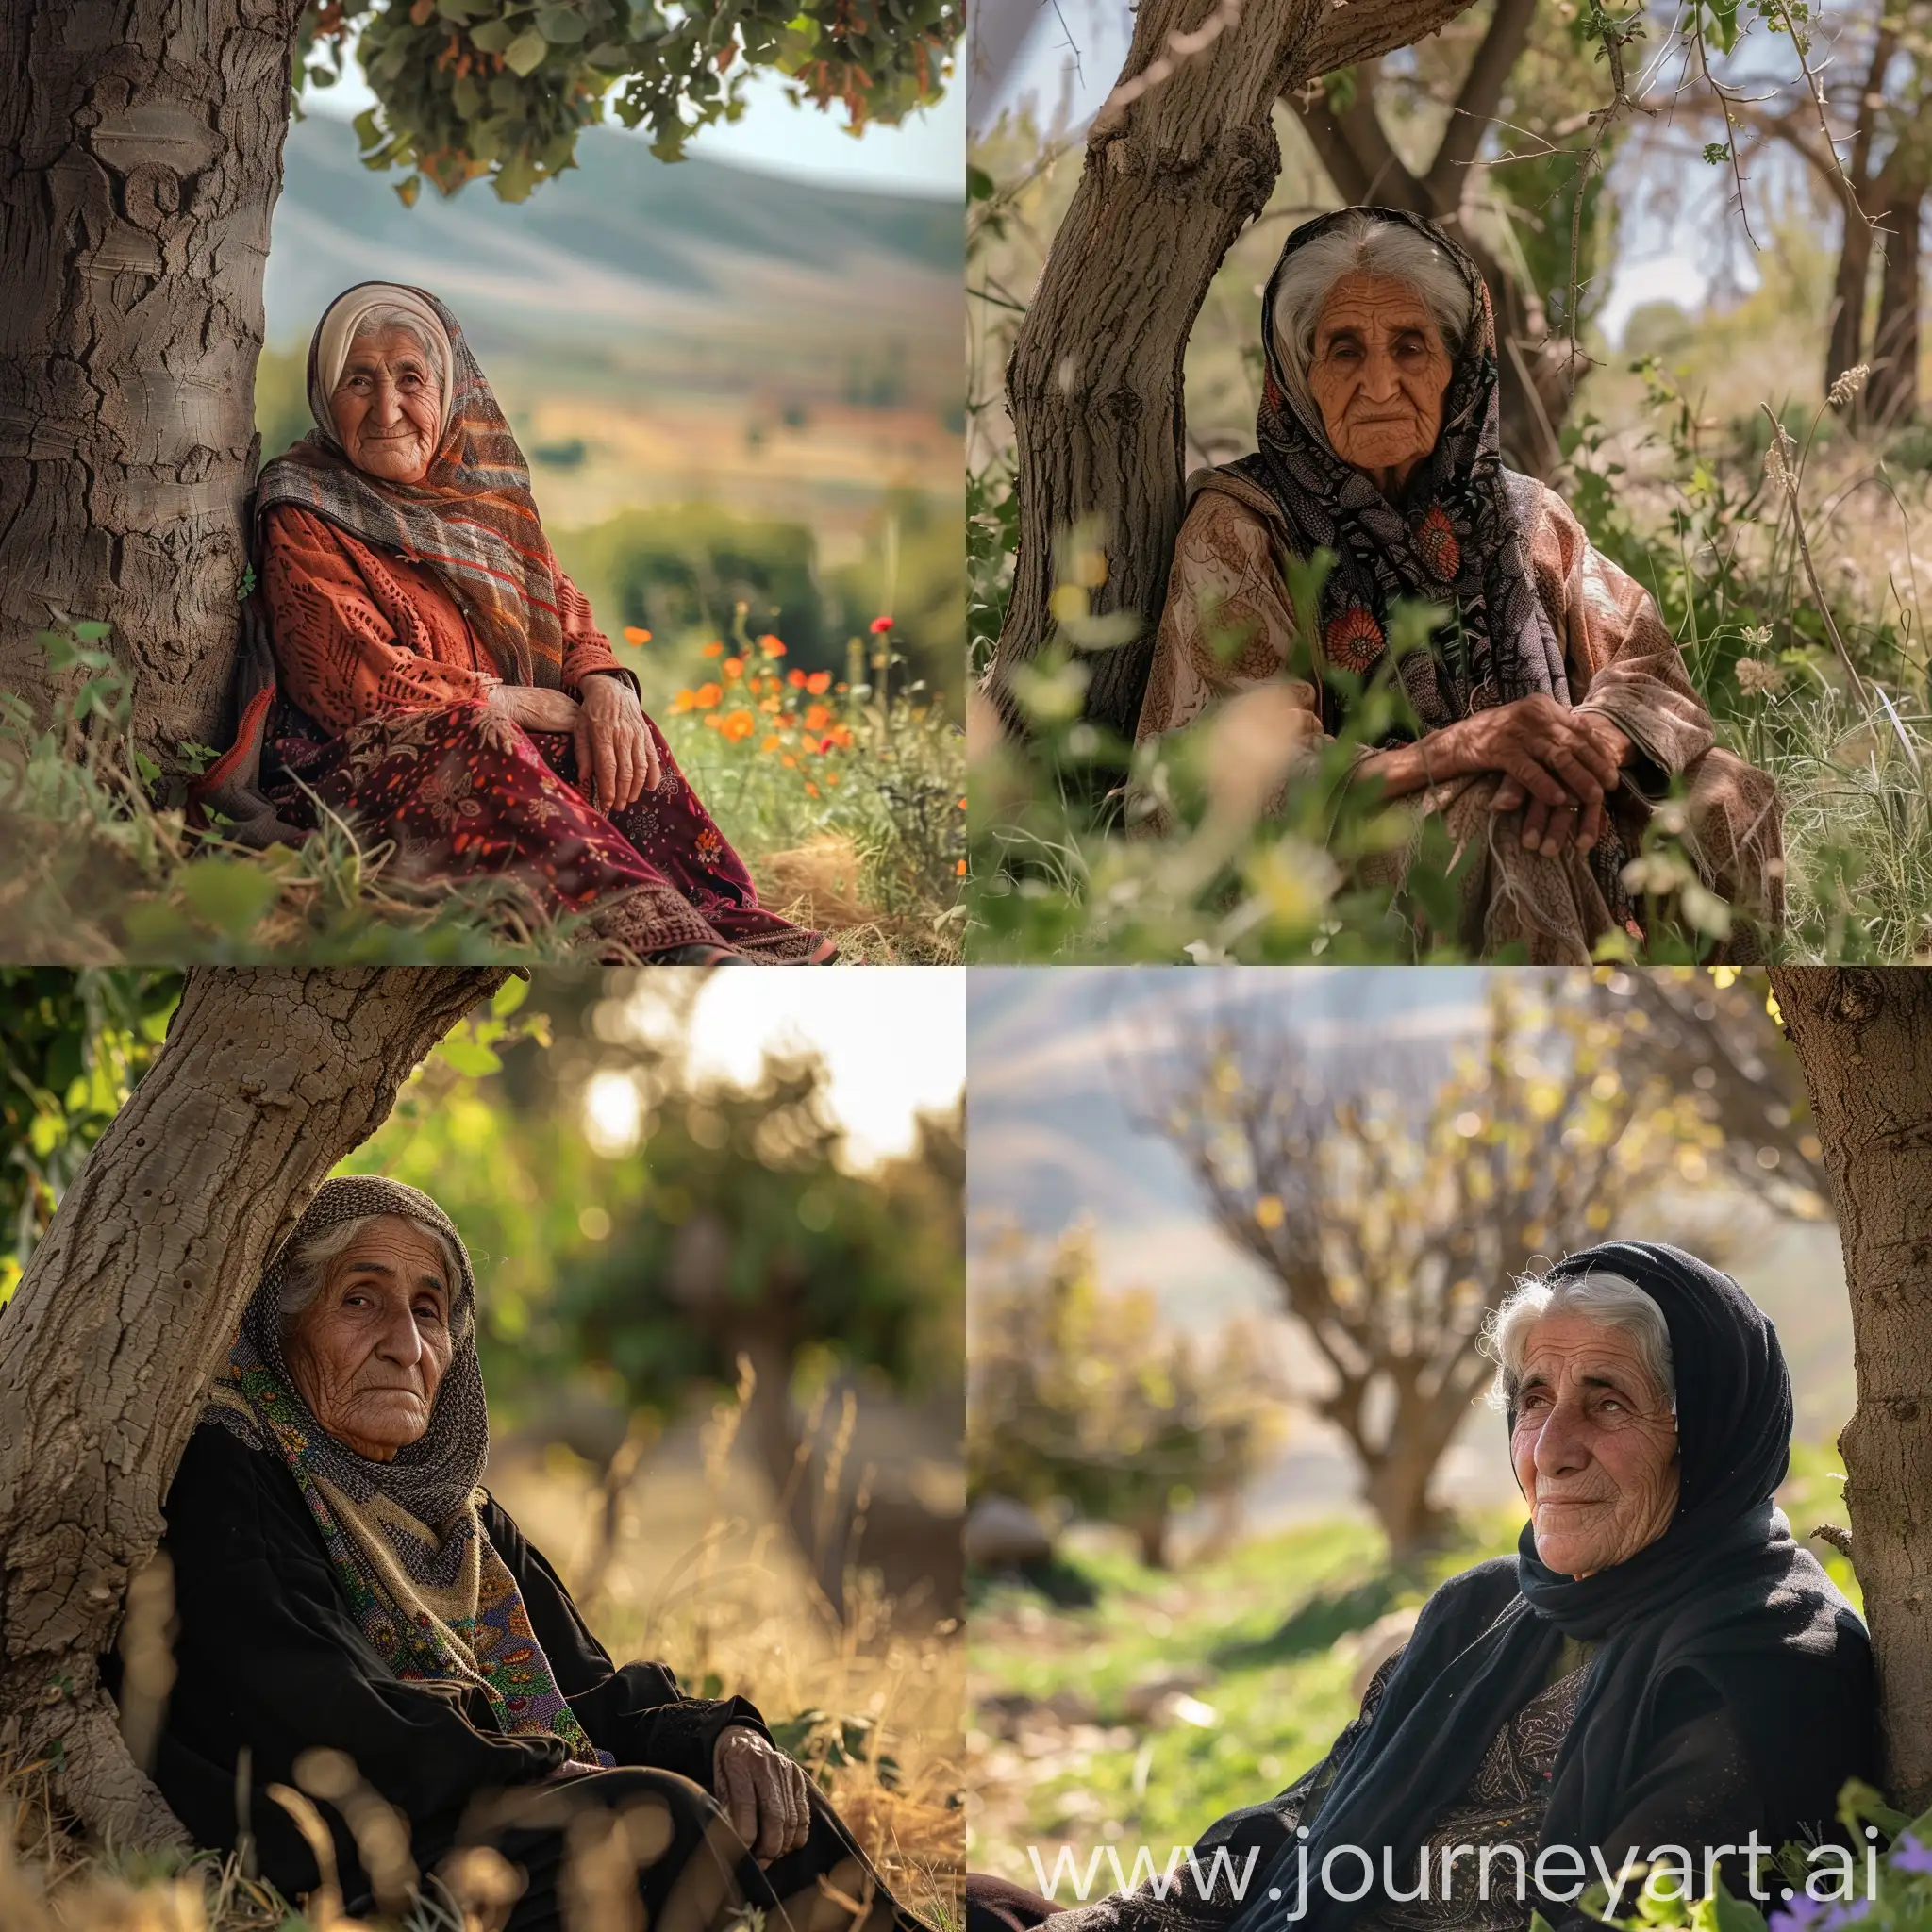 An old Iranian village woman is sitting in nature in front of a tree and the weather is sunny